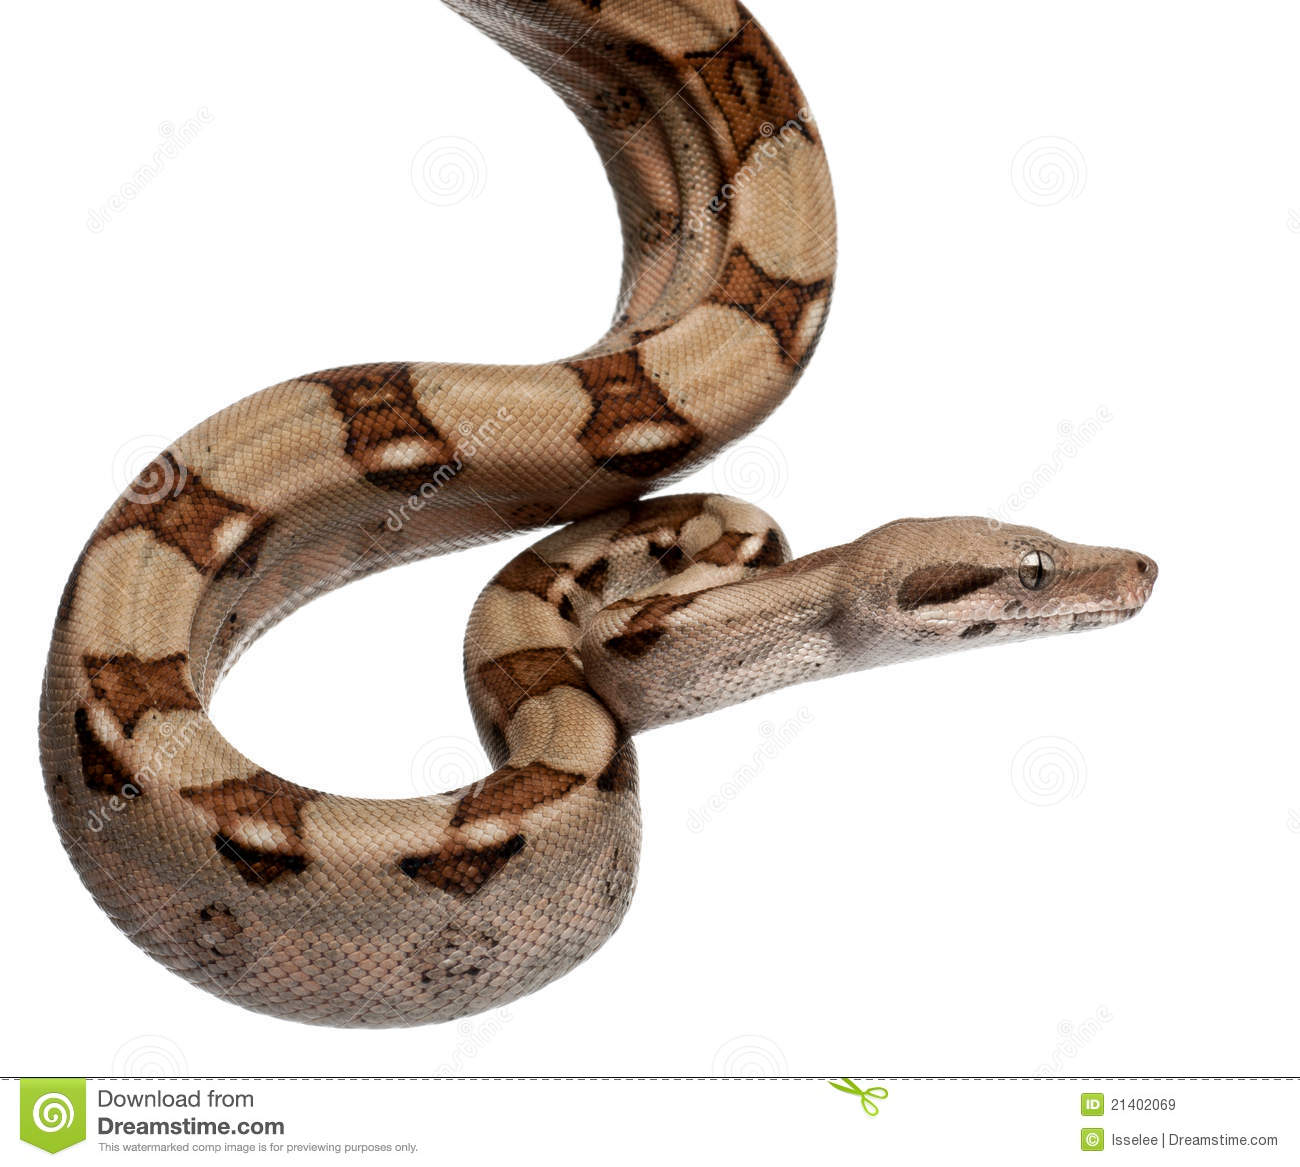 Salmon Boa Constrictor Boa Constrictor 2 Months Old In Front Of